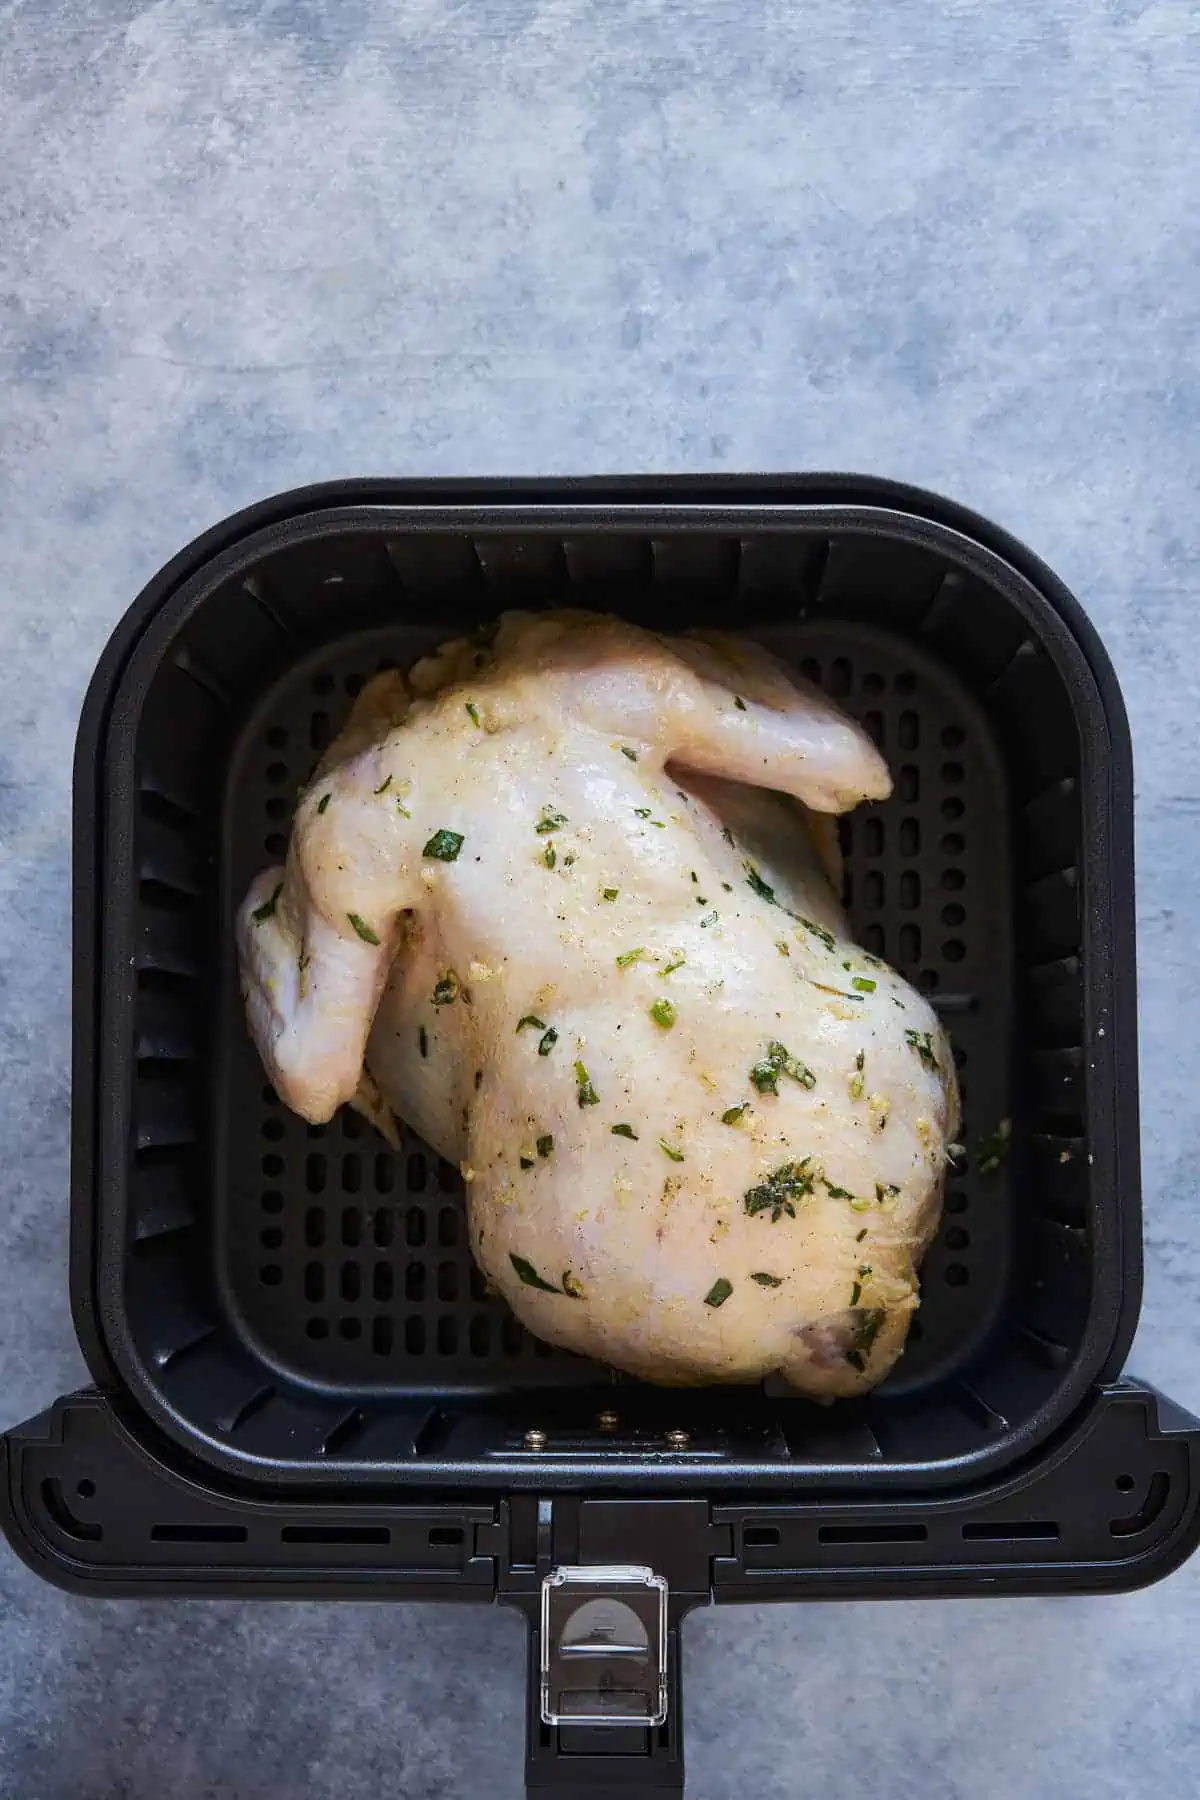 Breast side down, whole chicken in the air fryer basket.